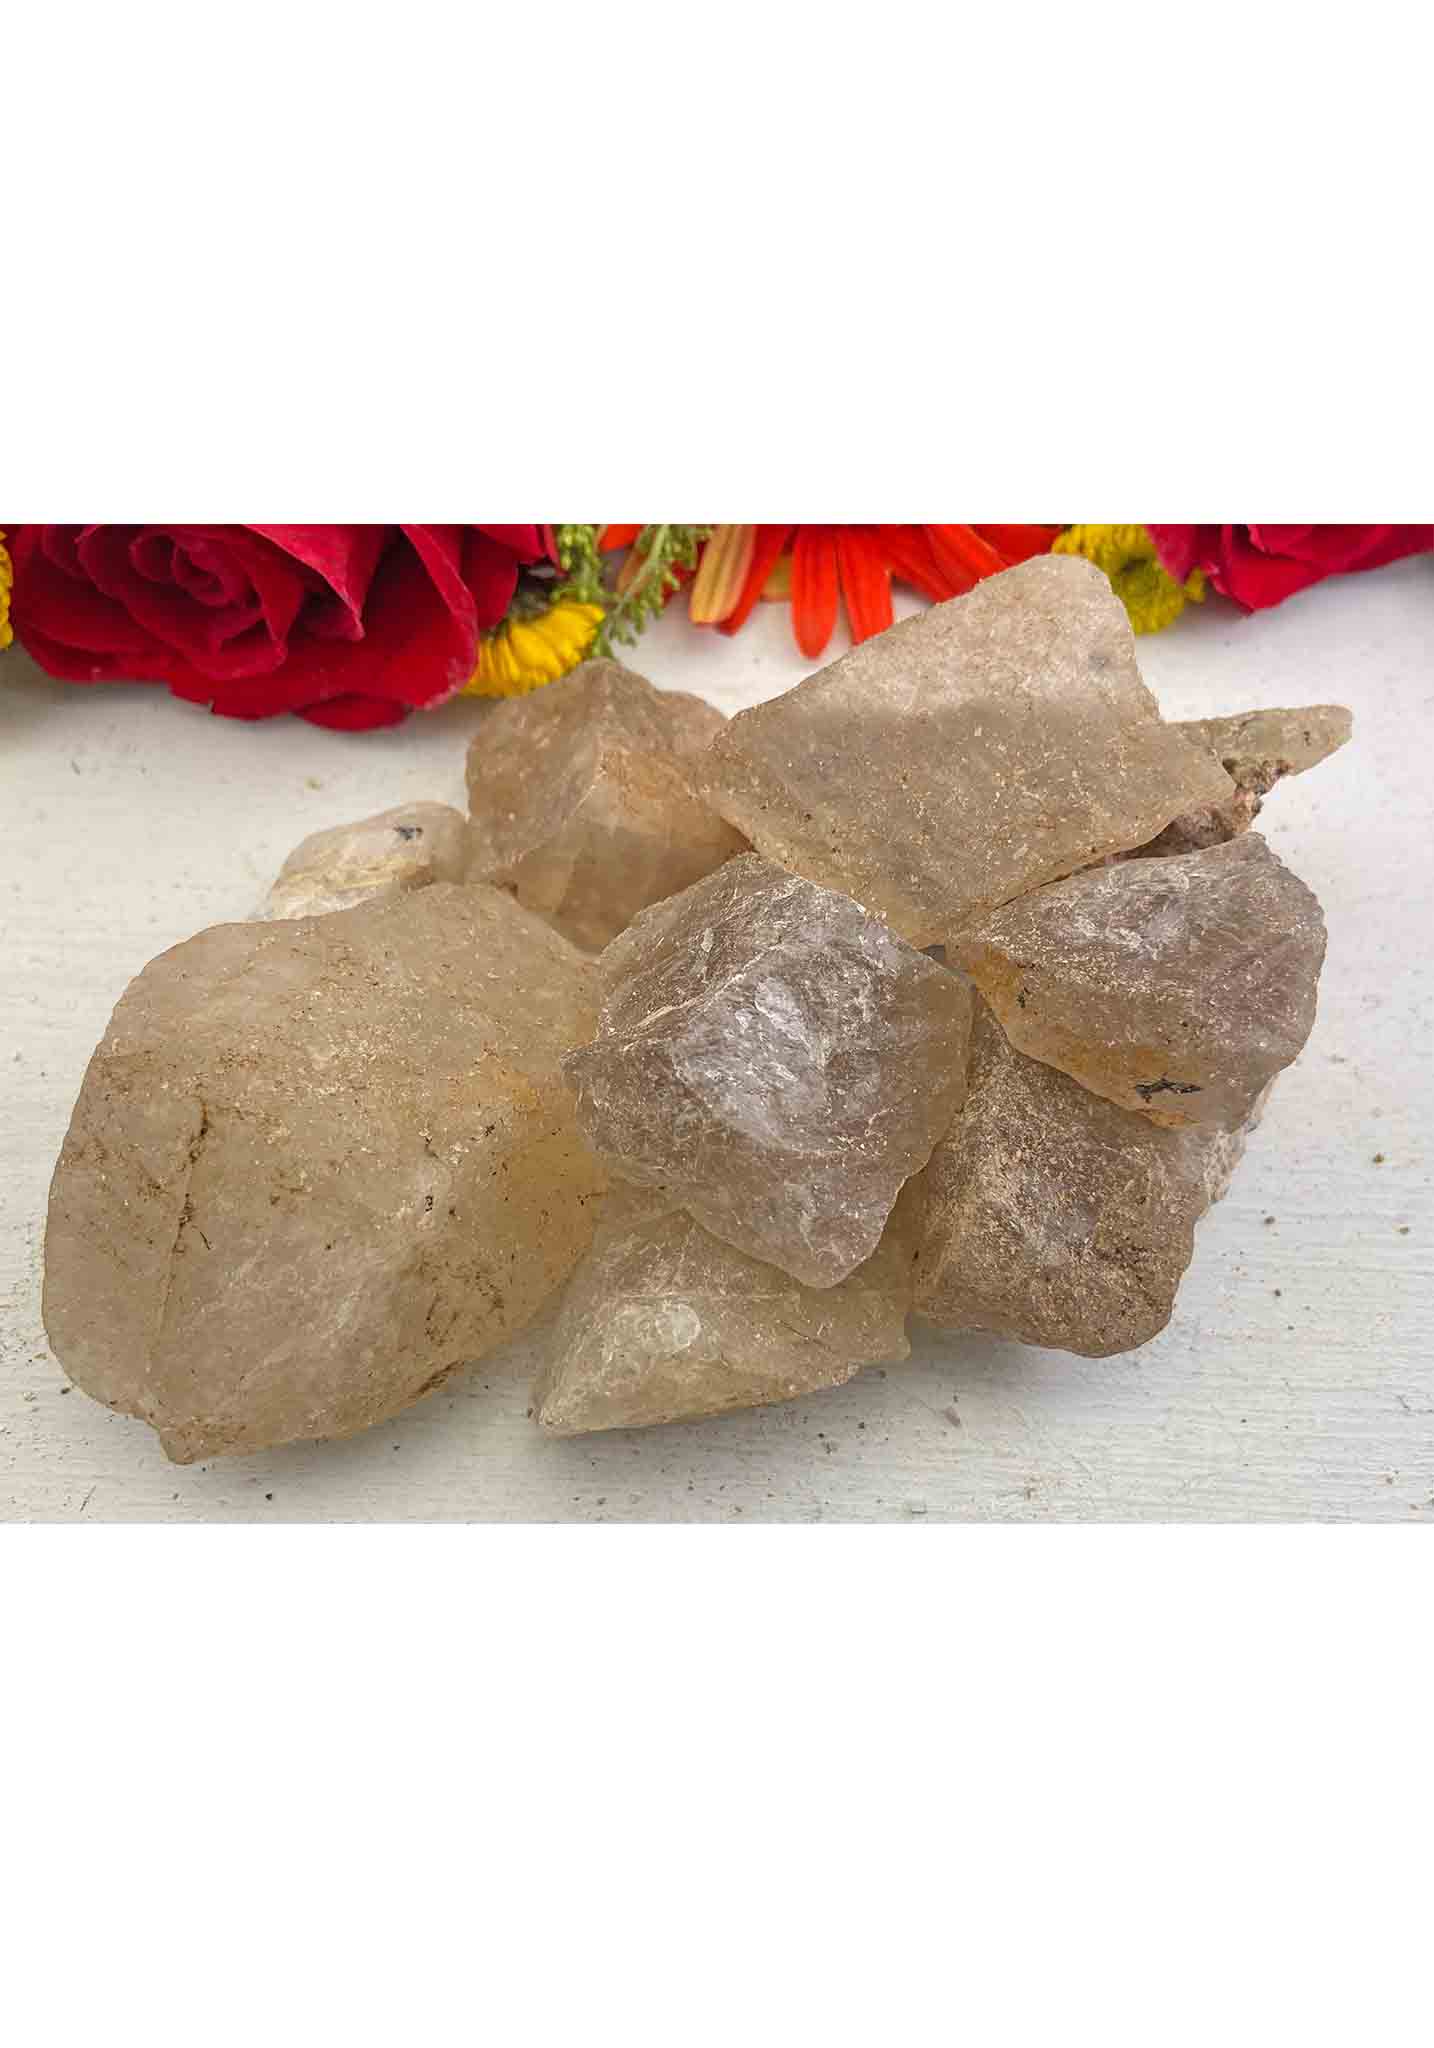 Gold Rutile Quartz Raw Rough Natural Gemstone Chunk - Stone of the Personal Journey 2